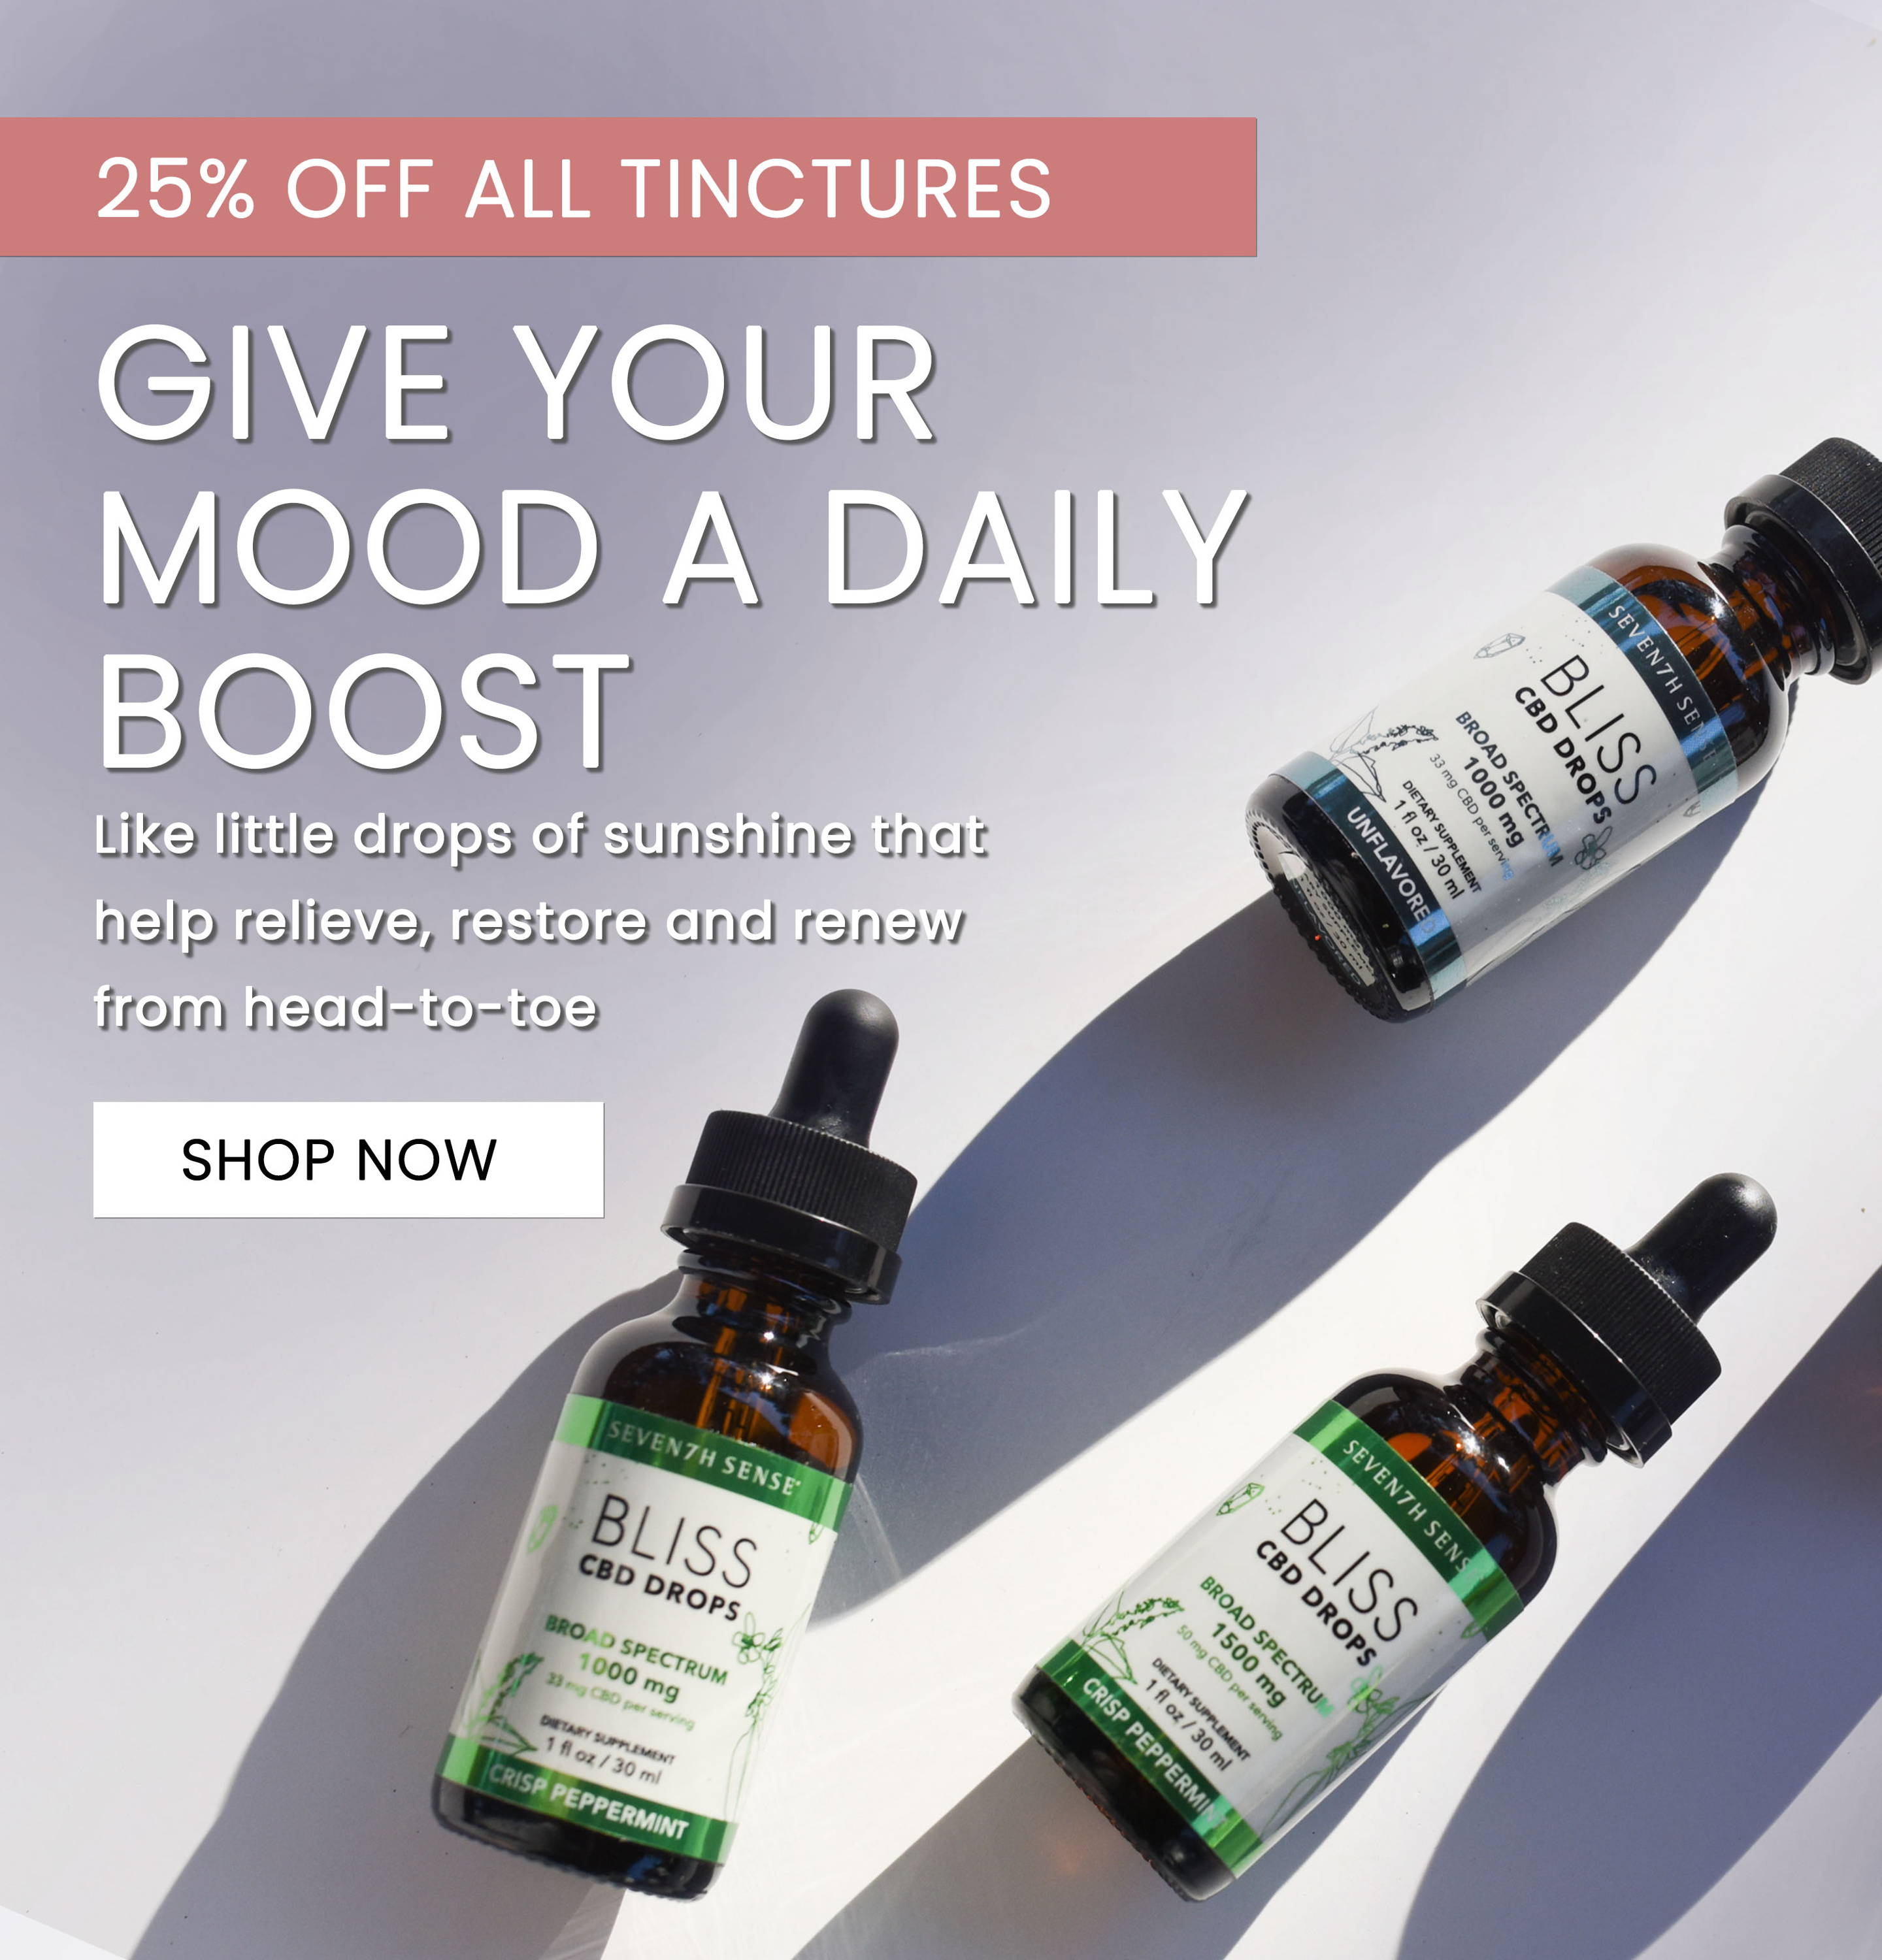 25% Off All Tinctures. Give your mood a daily boost.